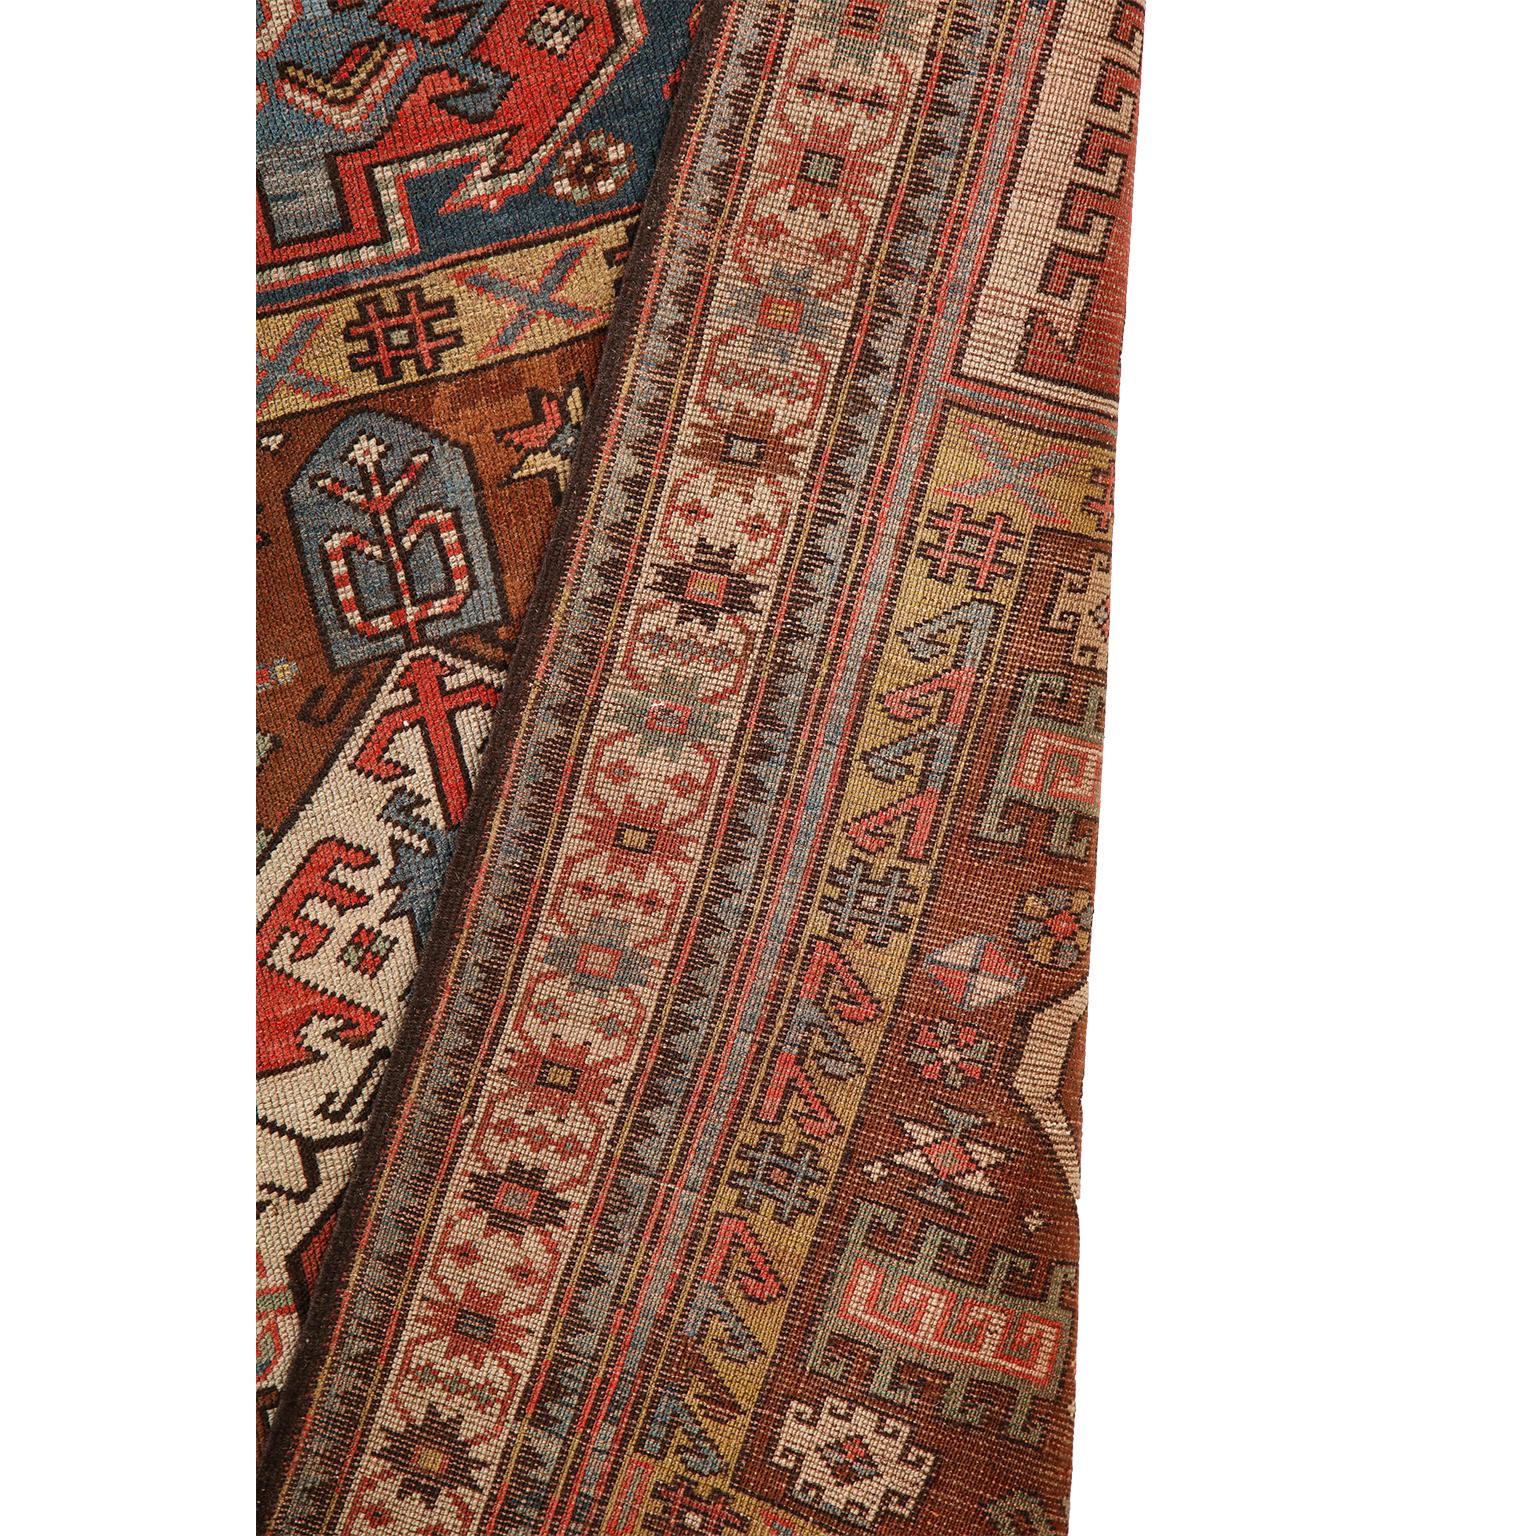 Antique 1880s Caucasian Rug, Wool, Blue, Green, Red, 4' x 6' For Sale 7